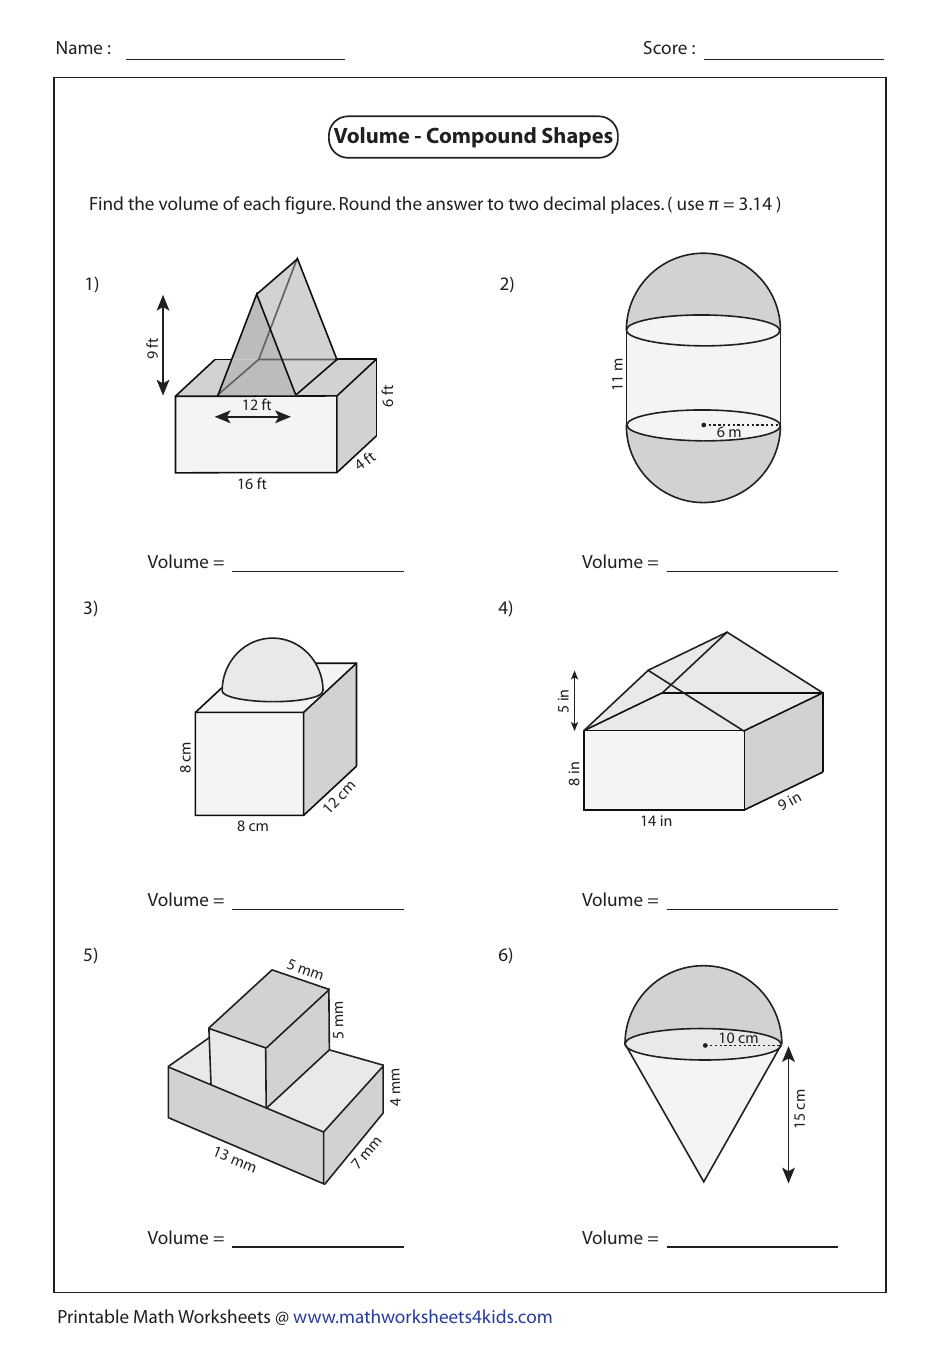 Volume of Compound Shapes Worksheet with Answers - Pyramid image preview